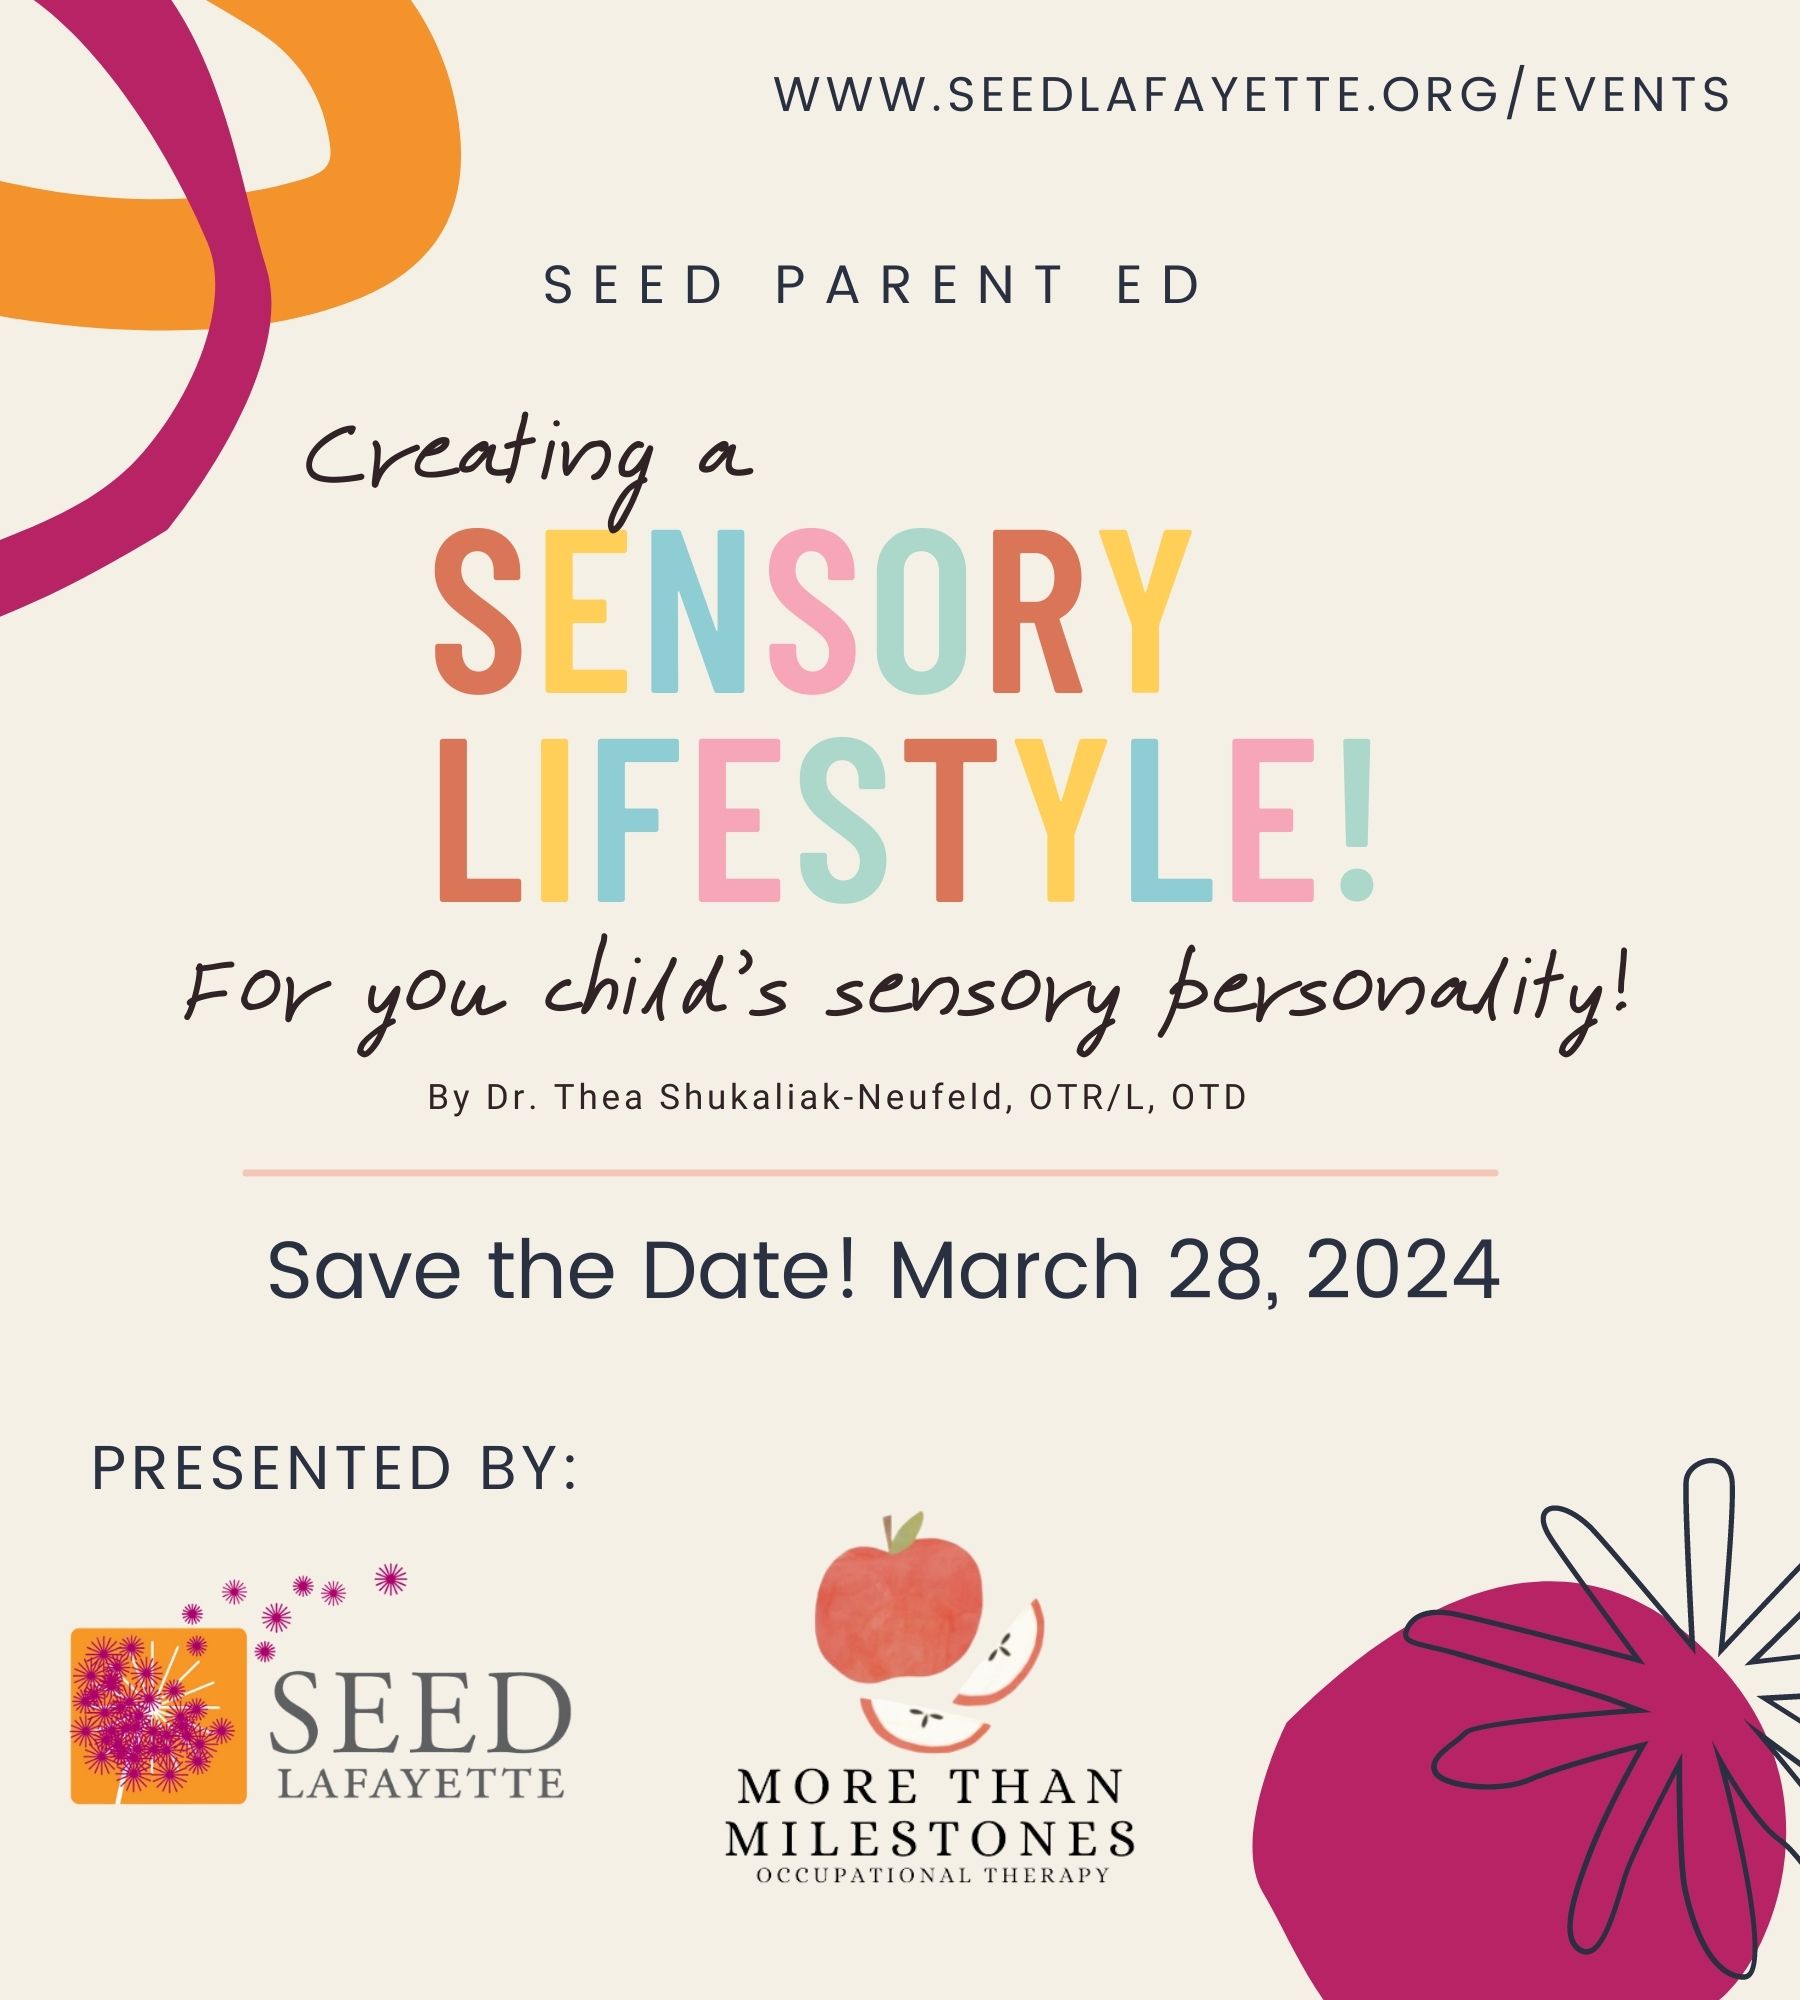 SEED Parent Ed — Creating a Sensory Lifestyle for your child's sensory personality! Save the date of March 28, 2024. More details soon!